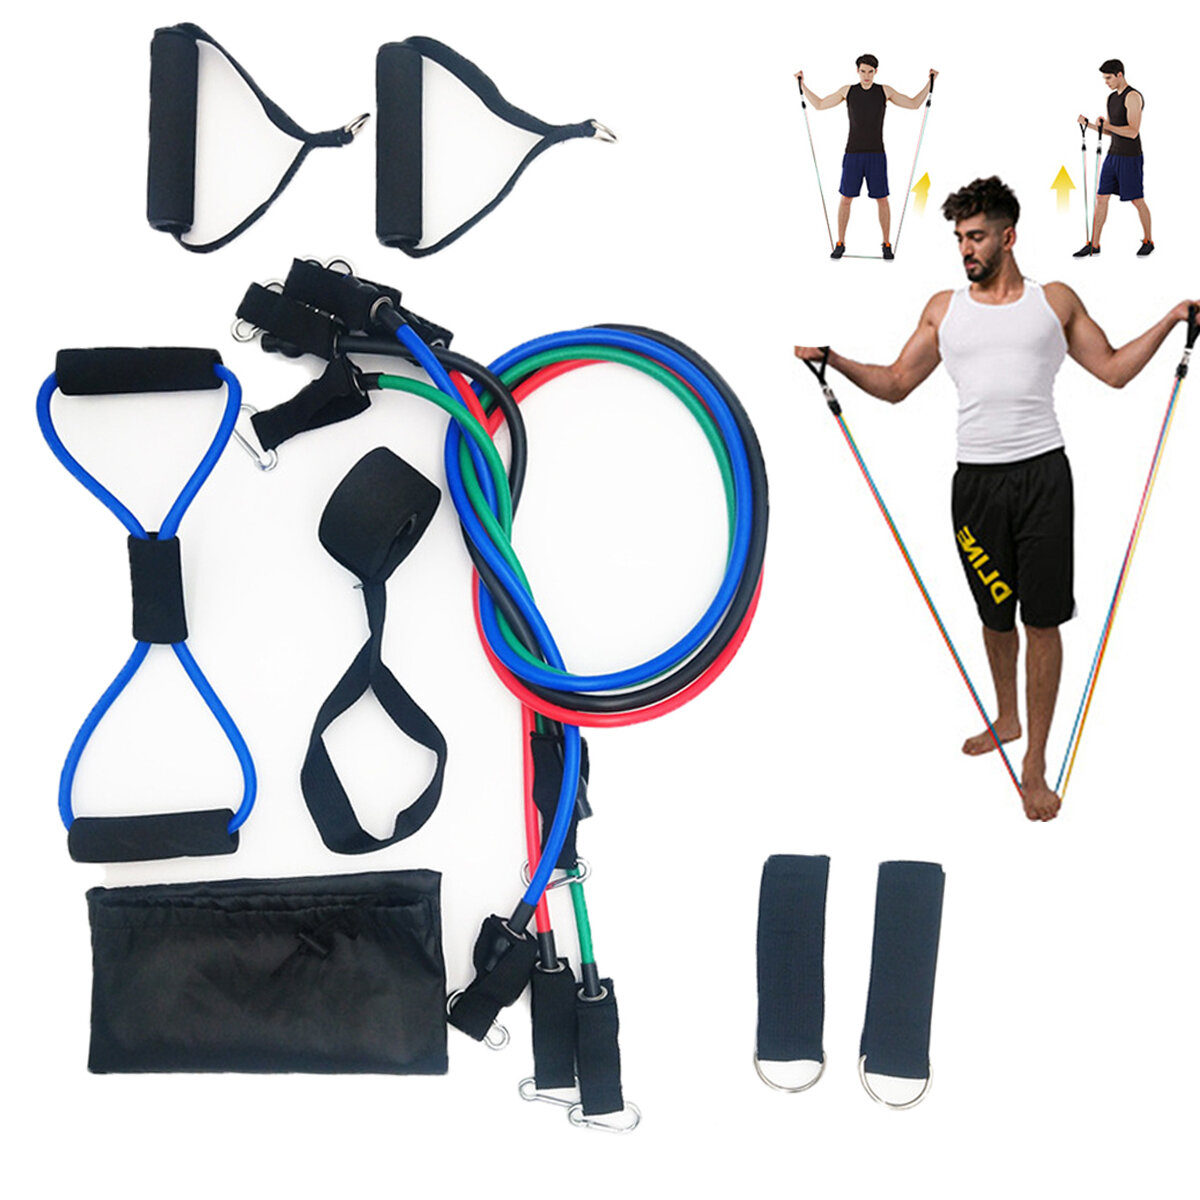 11PCS Home Workout Resistance Bands Set with Door Anchor Handles and Ankle Straps Muscle Training Equipment